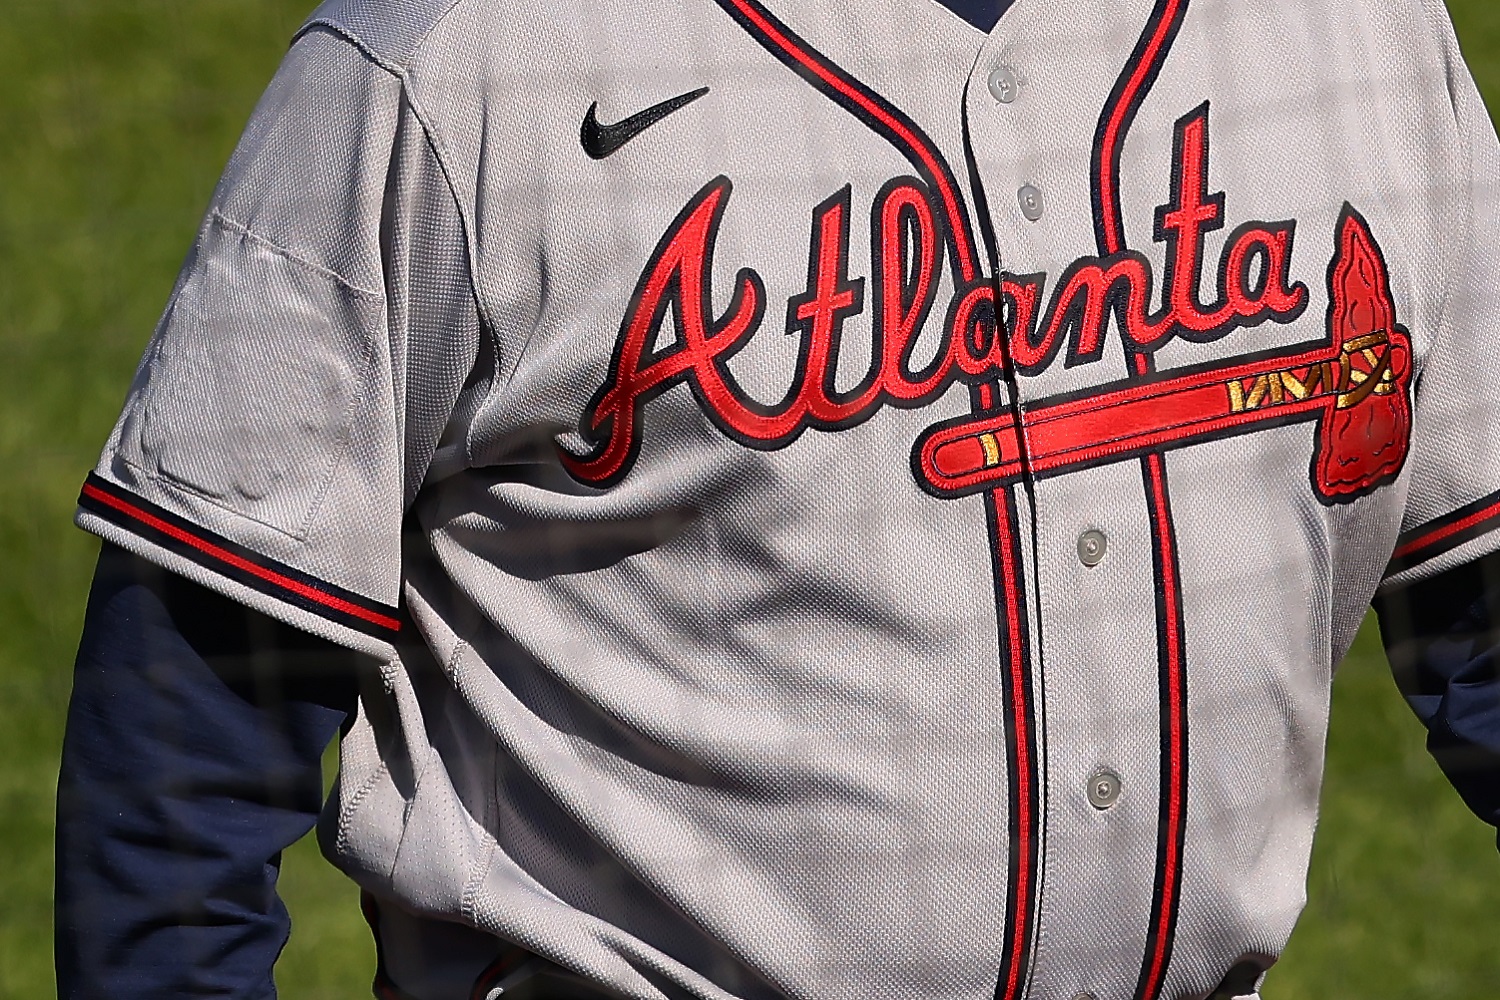 The All-Star Game logo is covered up on the right sleeve of manager Brian Snitker of the Atlanta Braves during a baseball game against the Philadelphia Phillies at Citizens Bank Park on April 4, 2021.